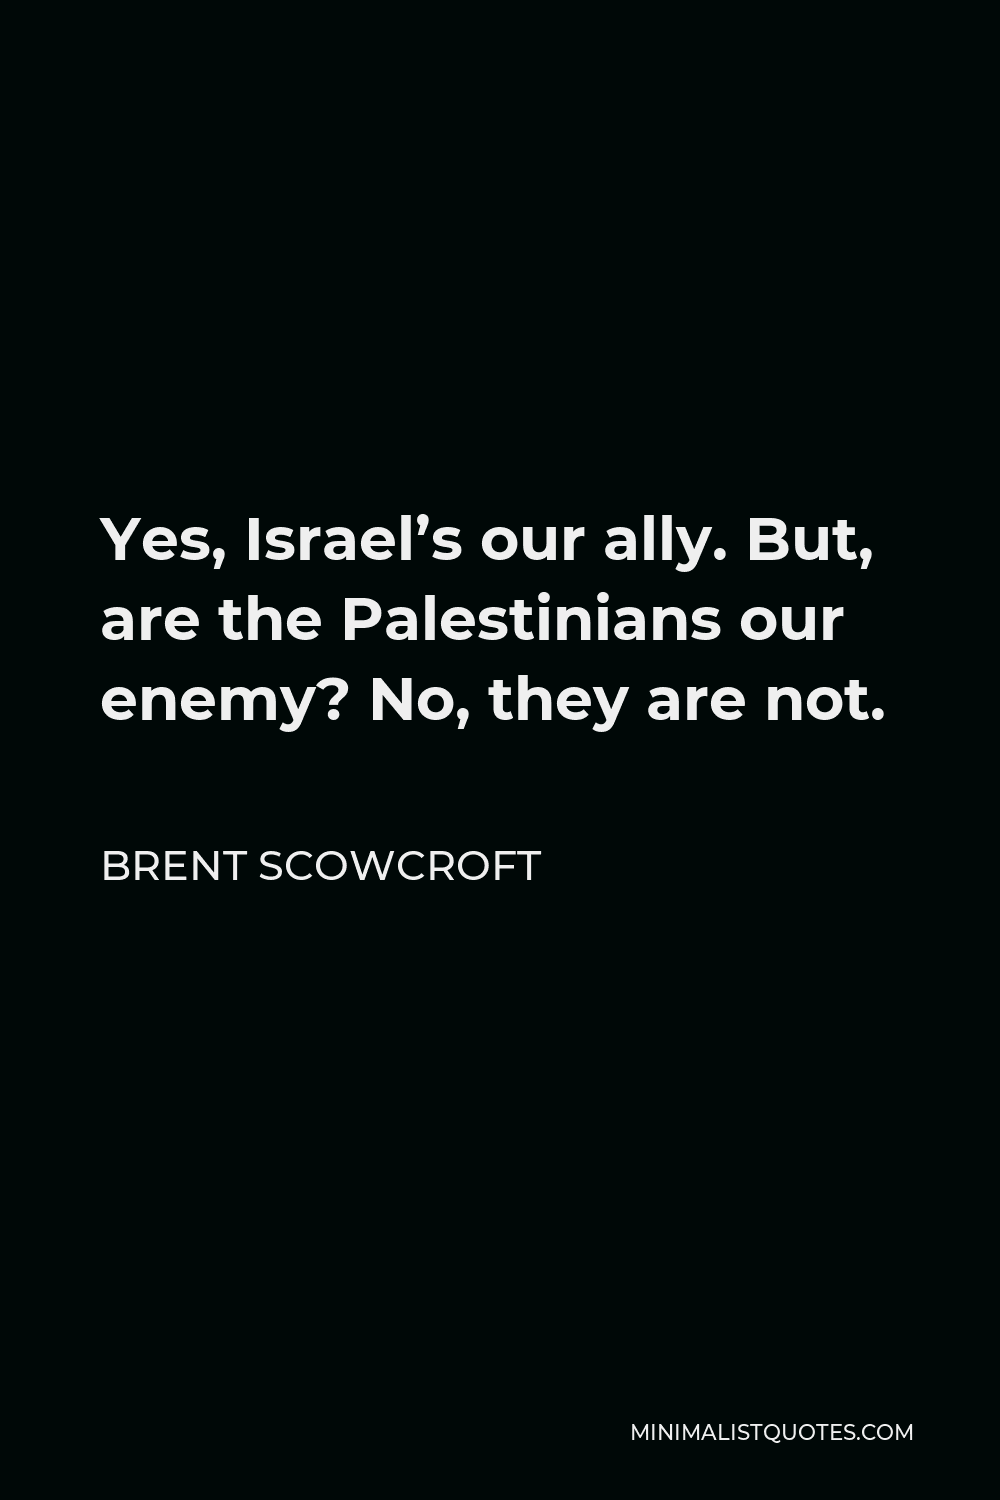 Brent Scowcroft Quote - Yes, Israel’s our ally. But, are the Palestinians our enemy? No, they are not.